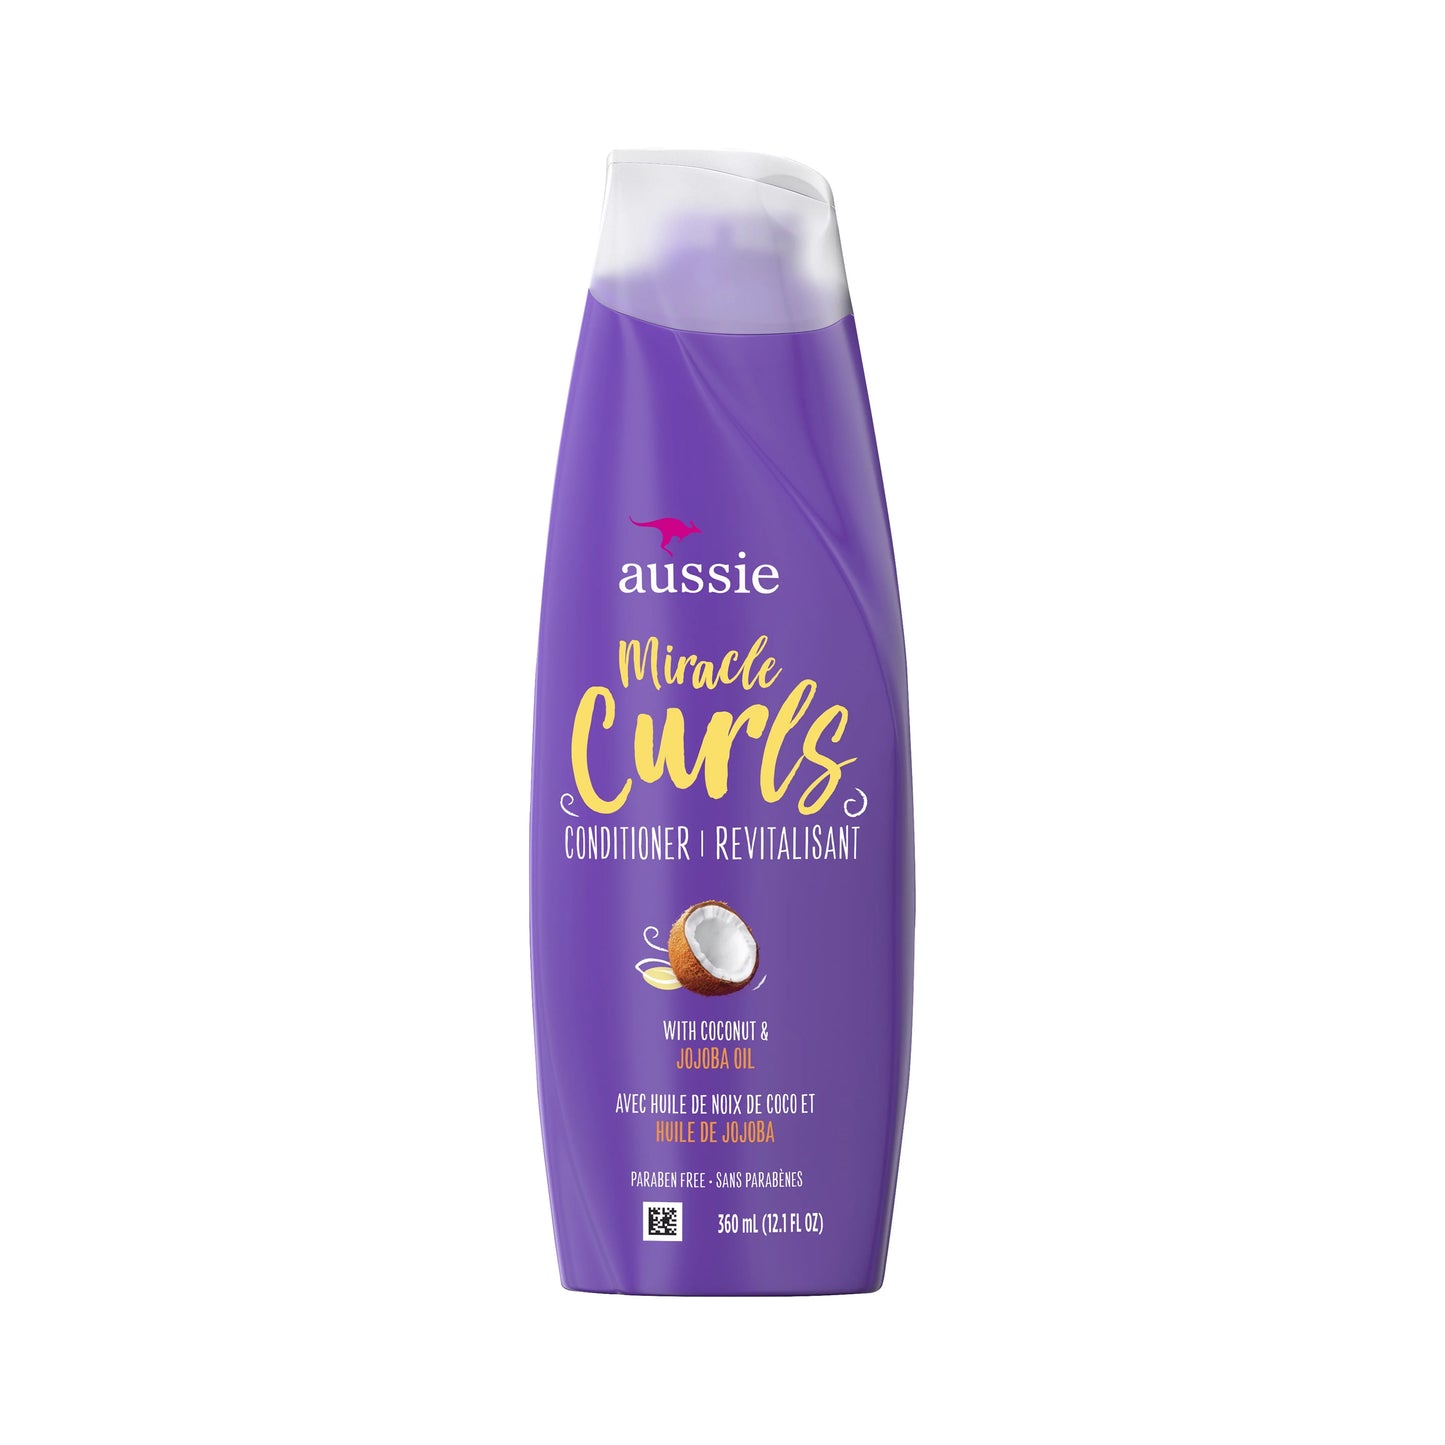 Aussie Miracle Curls Conditioner with Coconut Jojoba Oil 360 mL